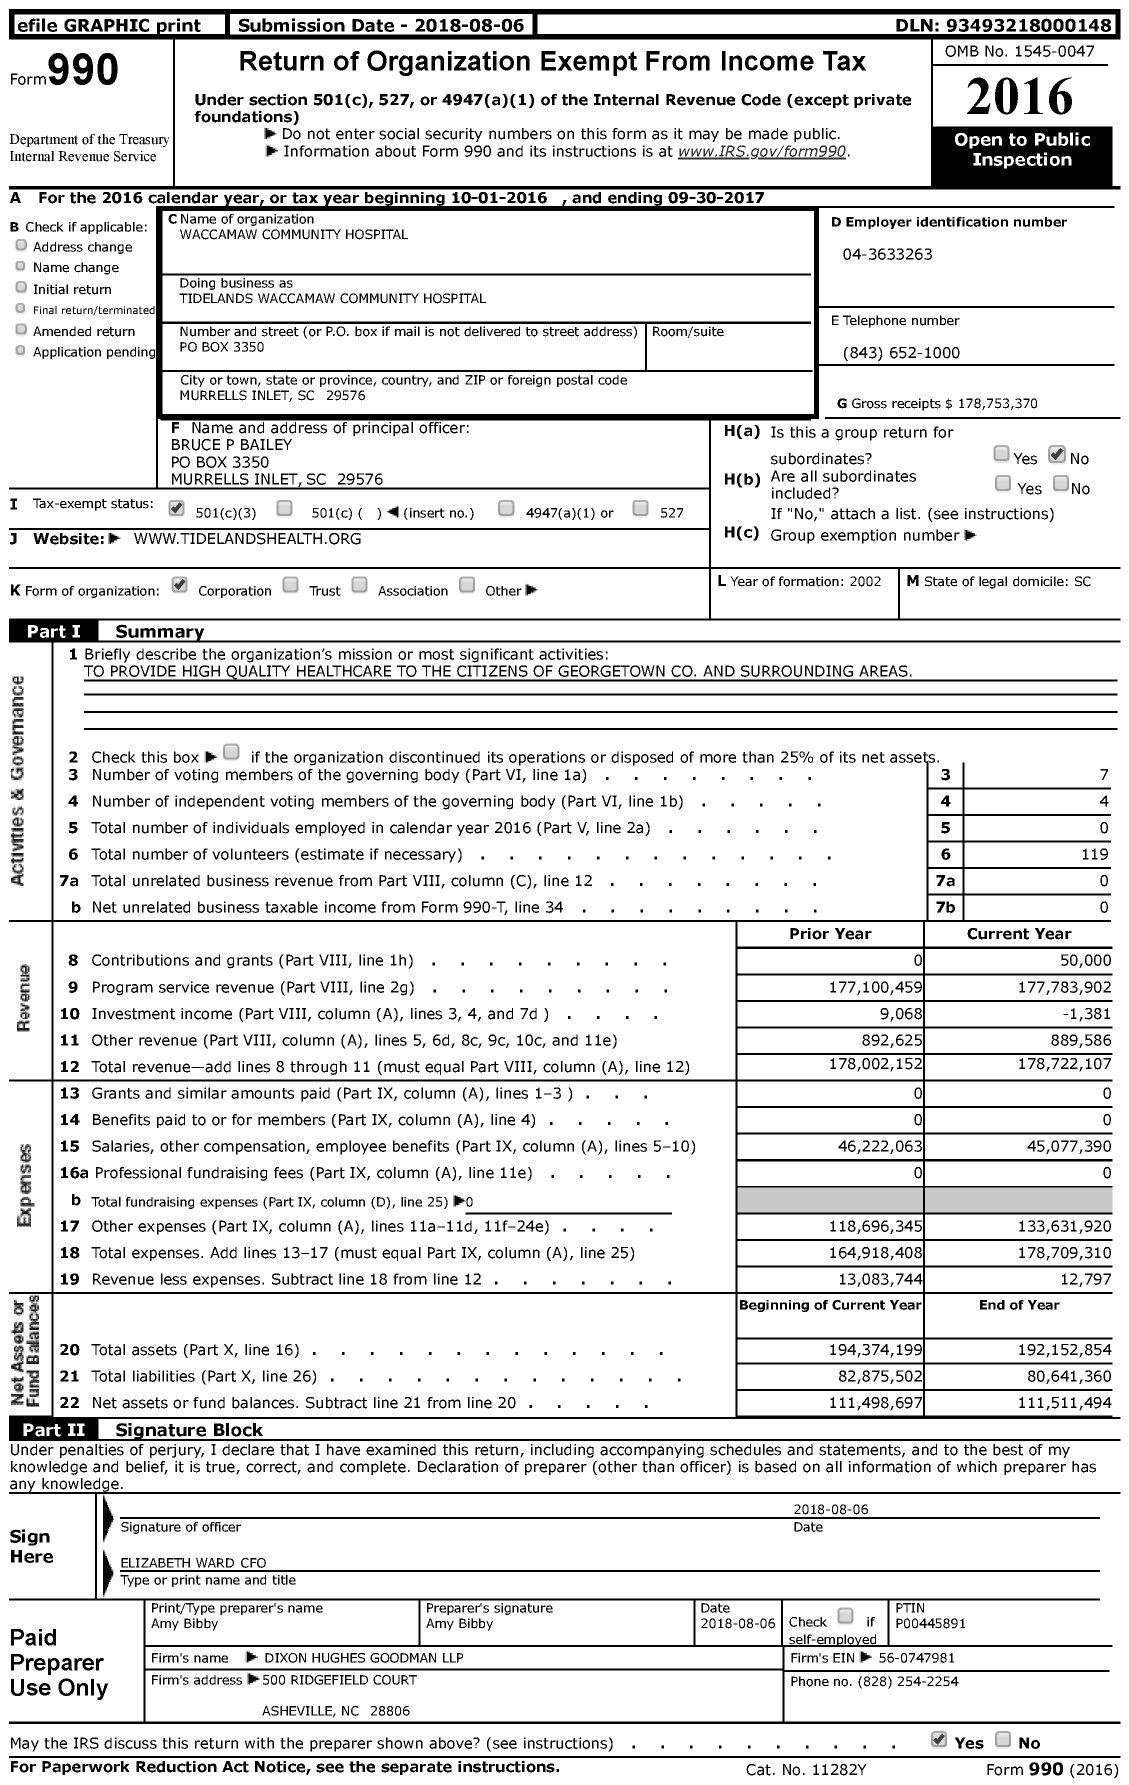 Image of first page of 2016 Form 990 for Tidelands Waccamaw Community Hospital